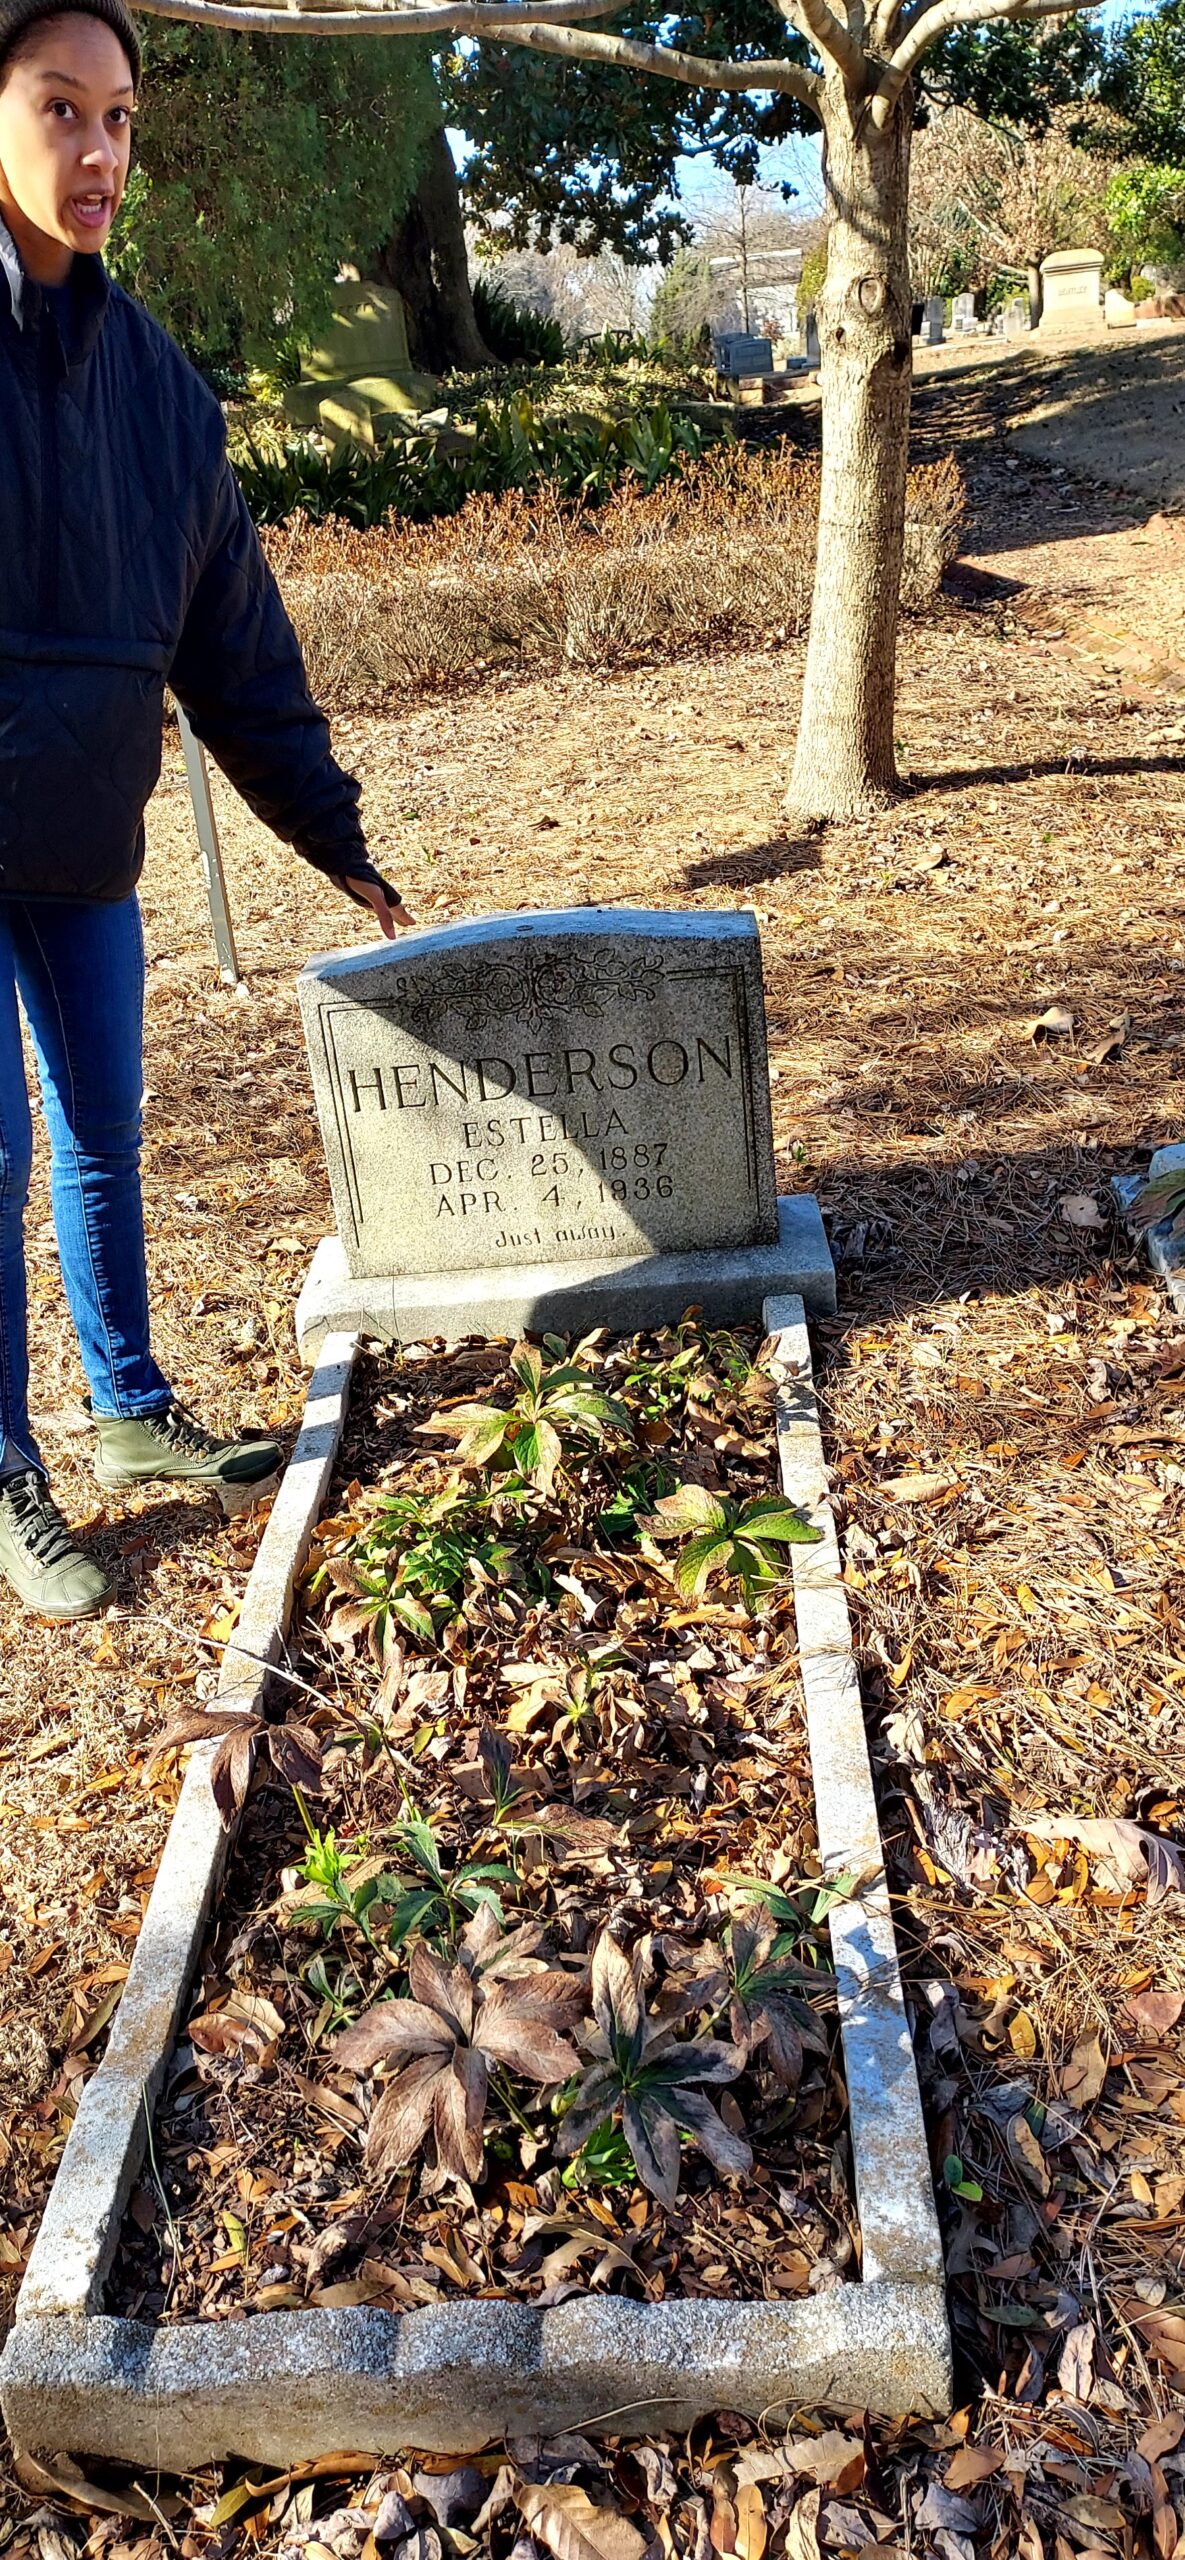 The forgotten stories of “Black Magnolias” from Oakland Cemetery